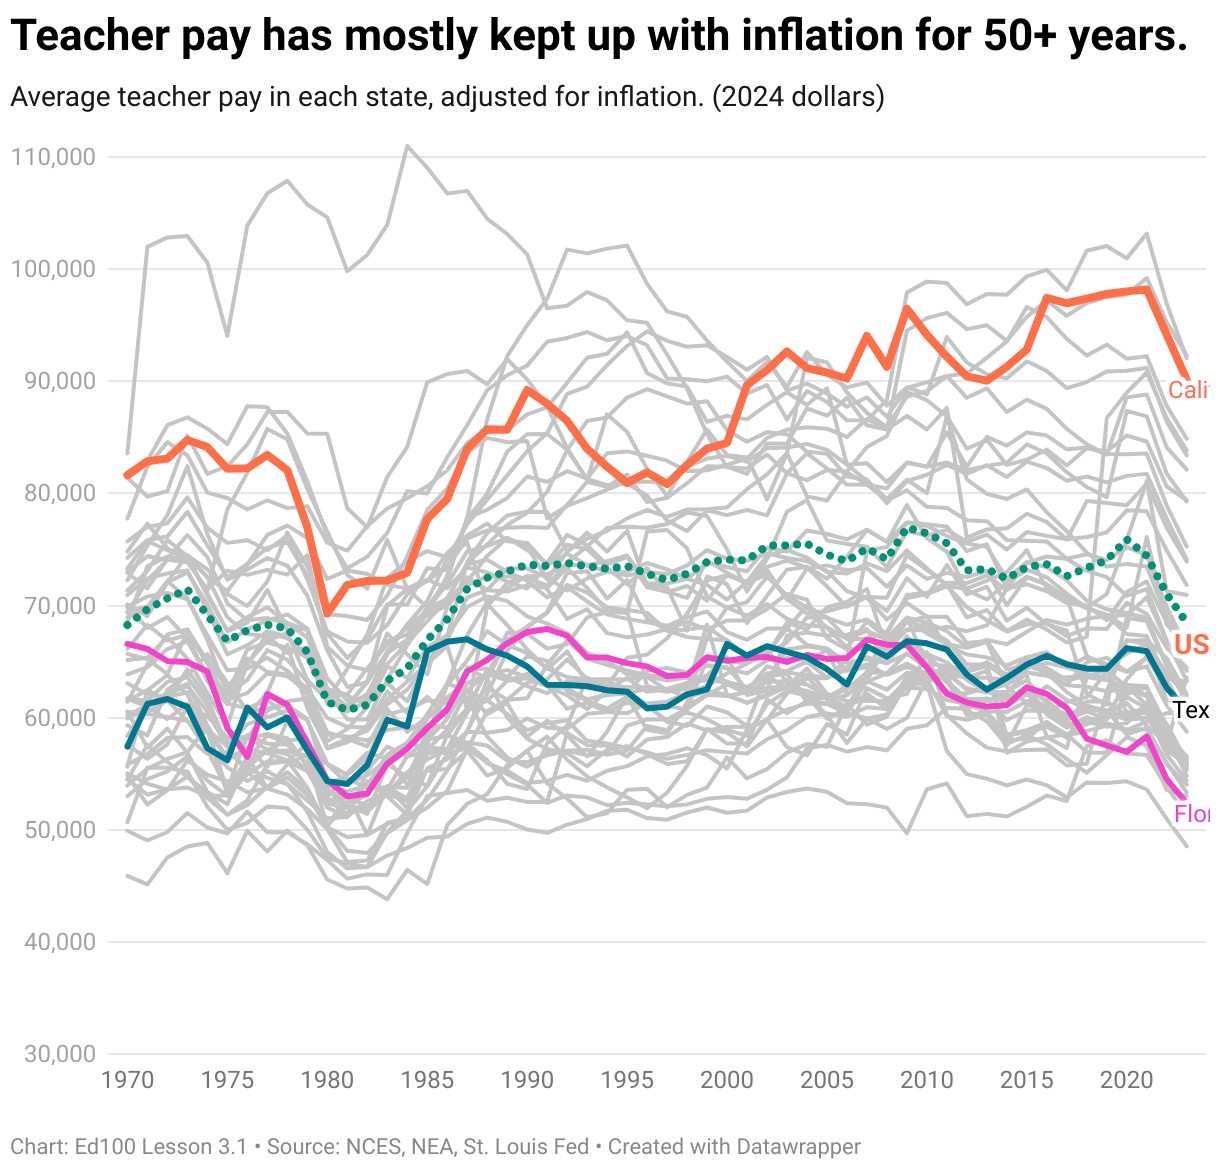 Teacher pay has mostly kept up with inflation for 50+ years.